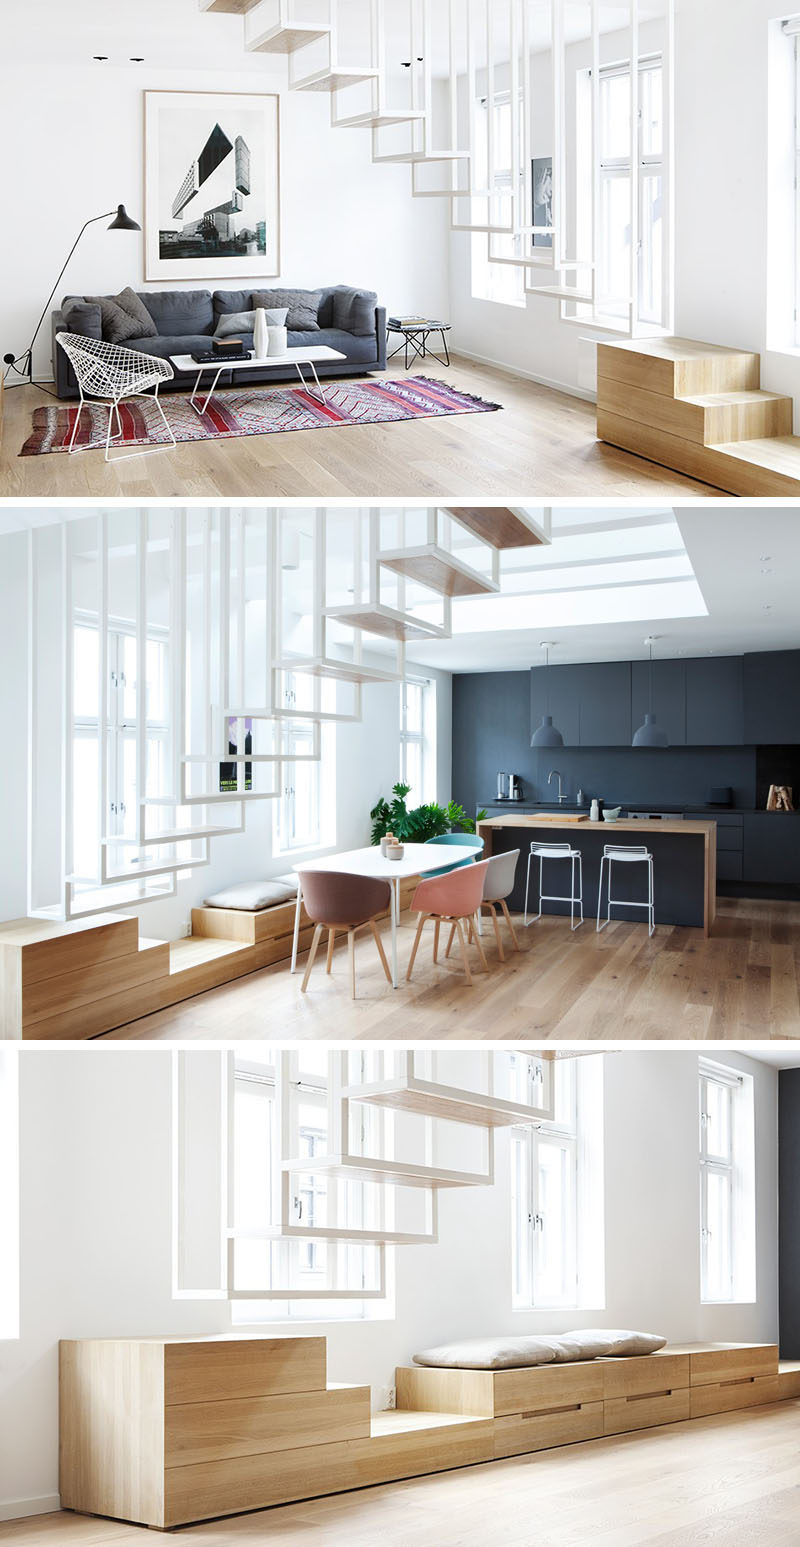 13 Stair Design Ideas For Small Spaces // These floating stairs maintain the flow of the apartment and keep it feeling open by letting light pass through the openings in the staircase.